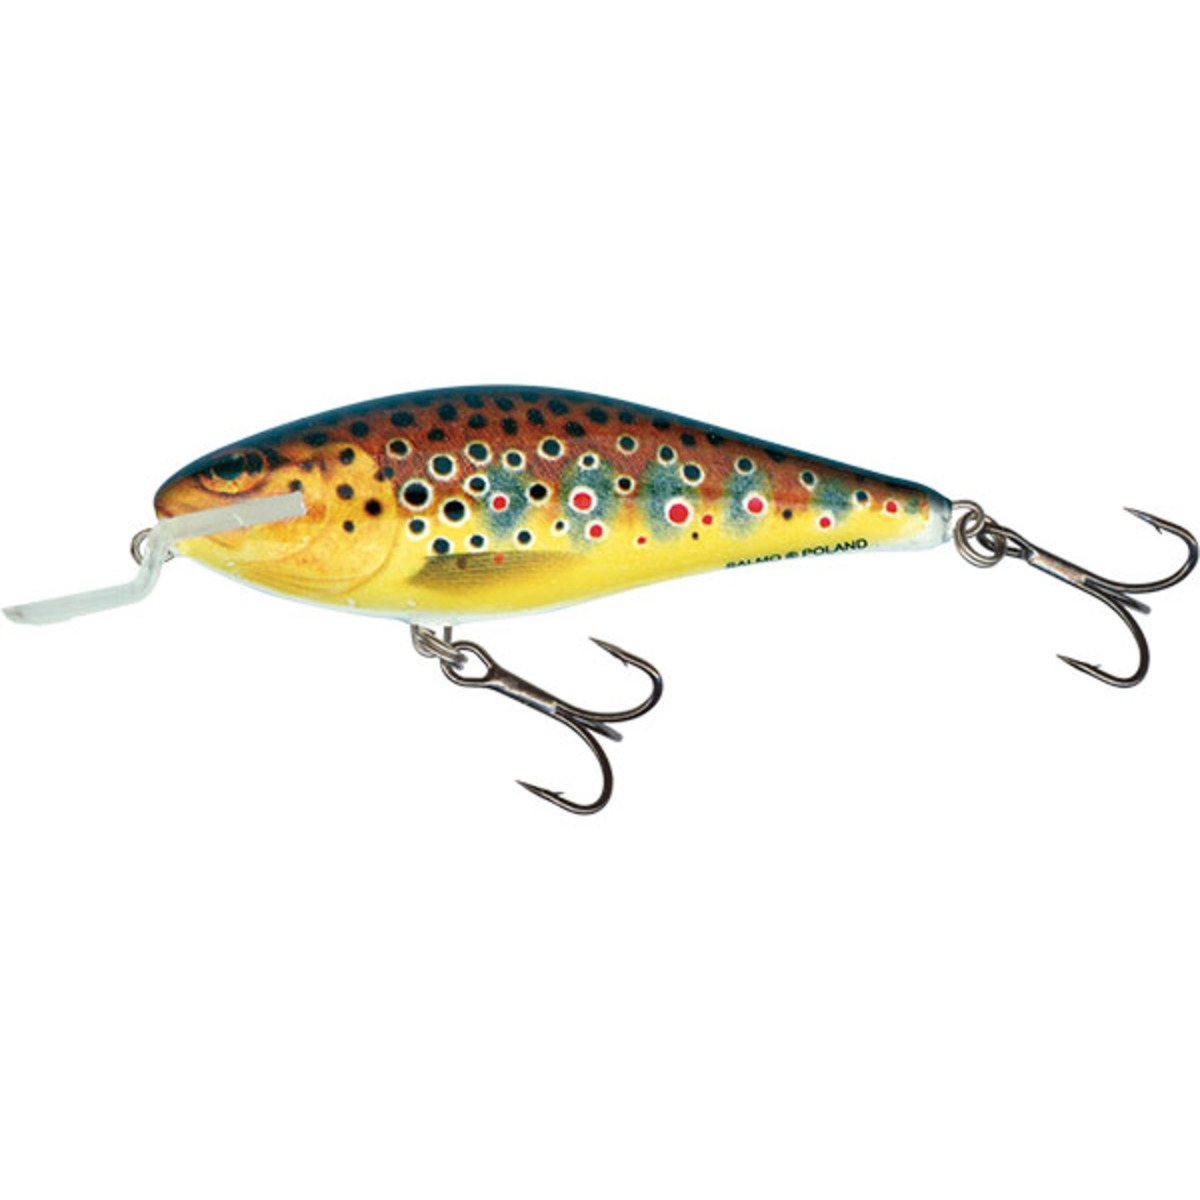 Salmo Executor Shallow Runner - 9 Cm - Trout